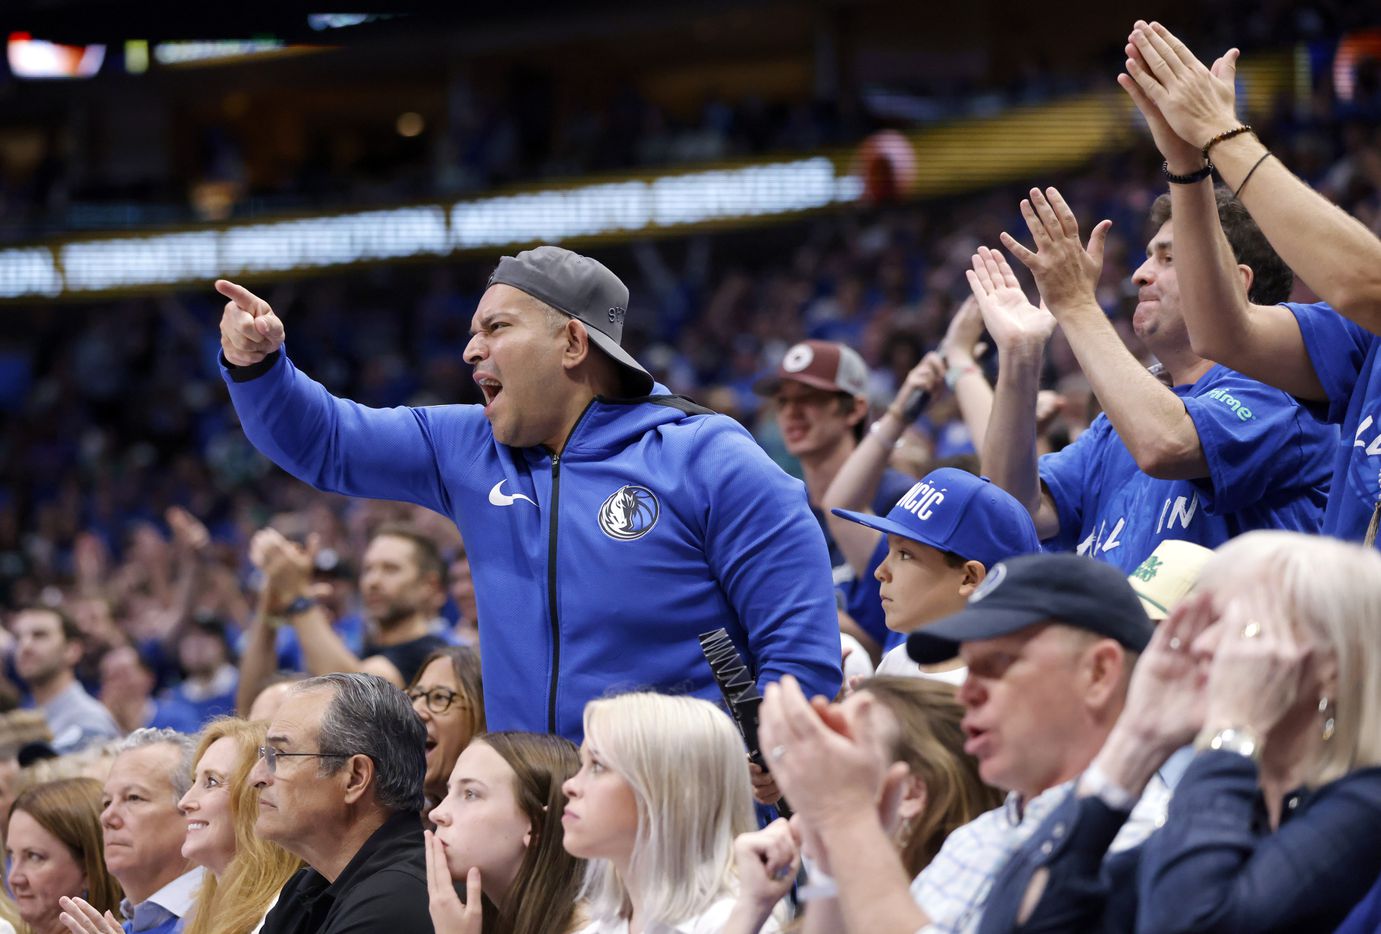 Dallas Mavericks fans were fired up when they drew closer to the Utah Jazz in the fourth...